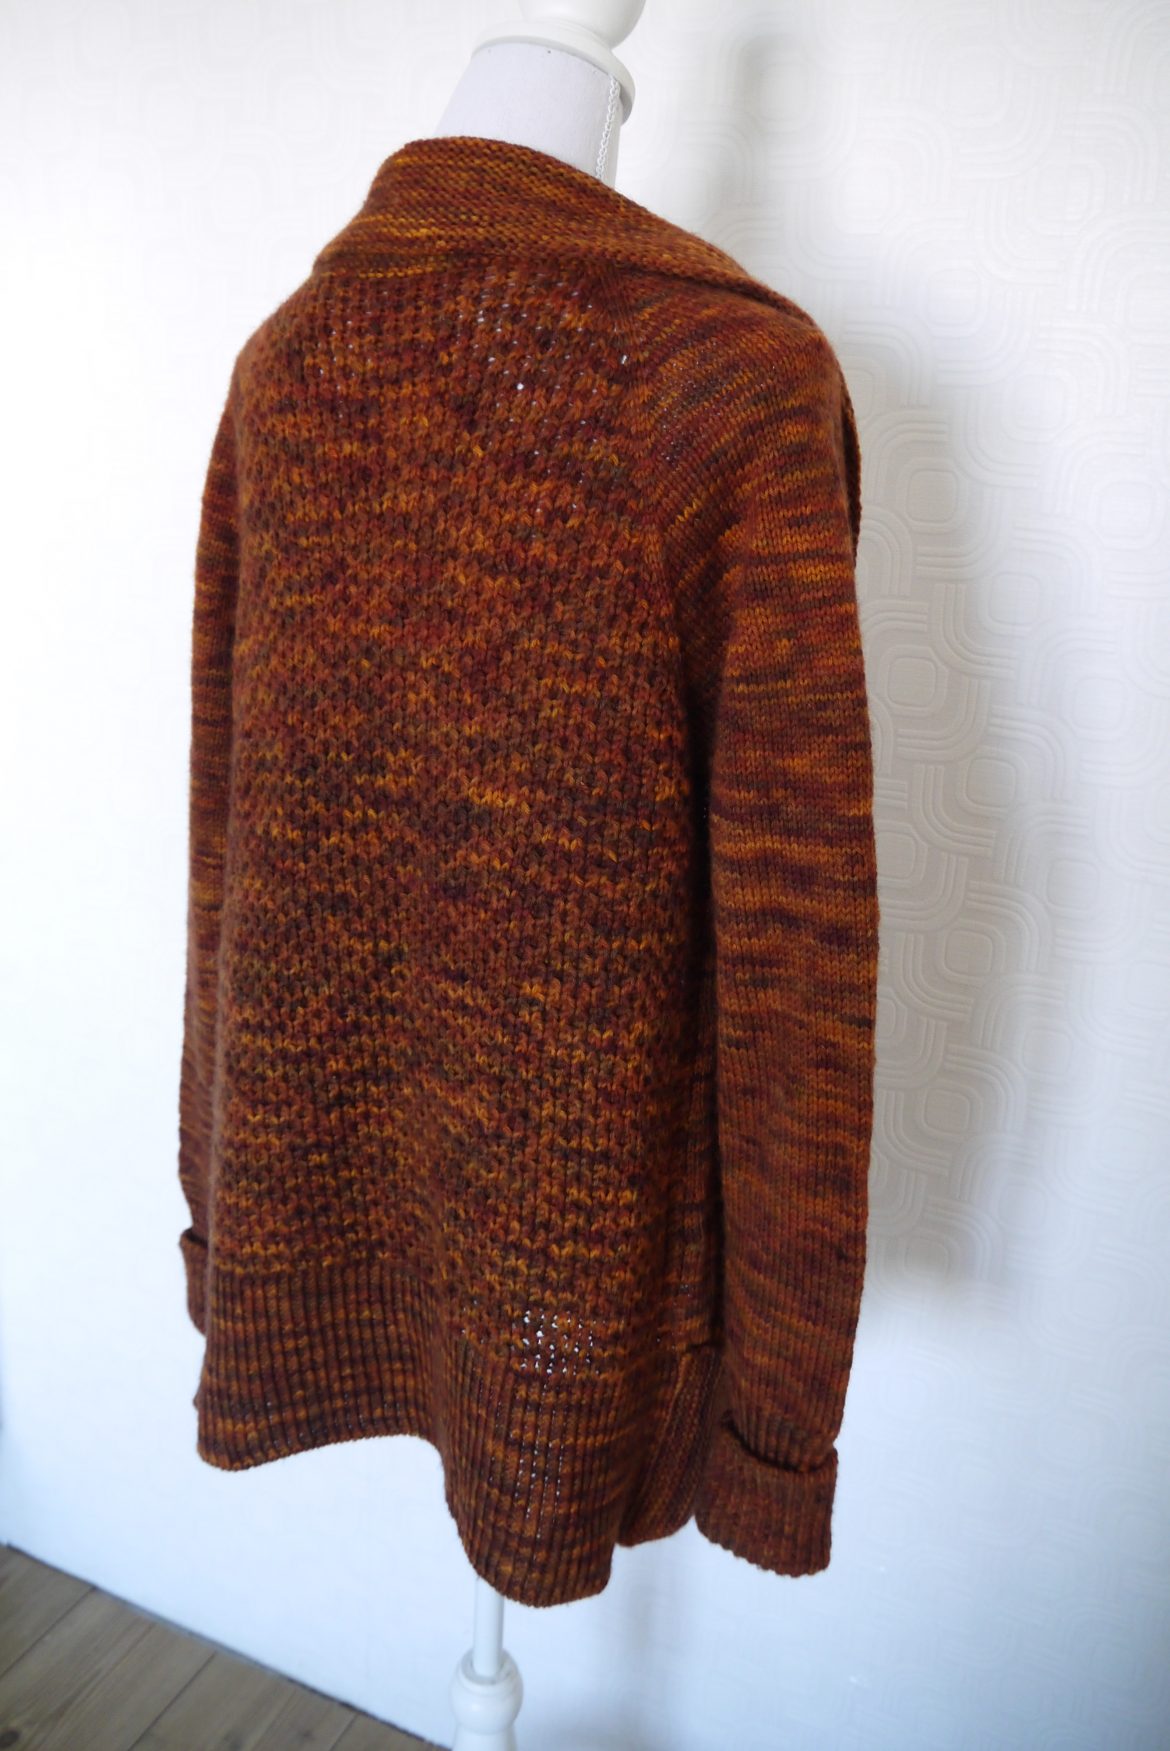 Portage cardigan by Melissa Schaschwary – The Craft Area